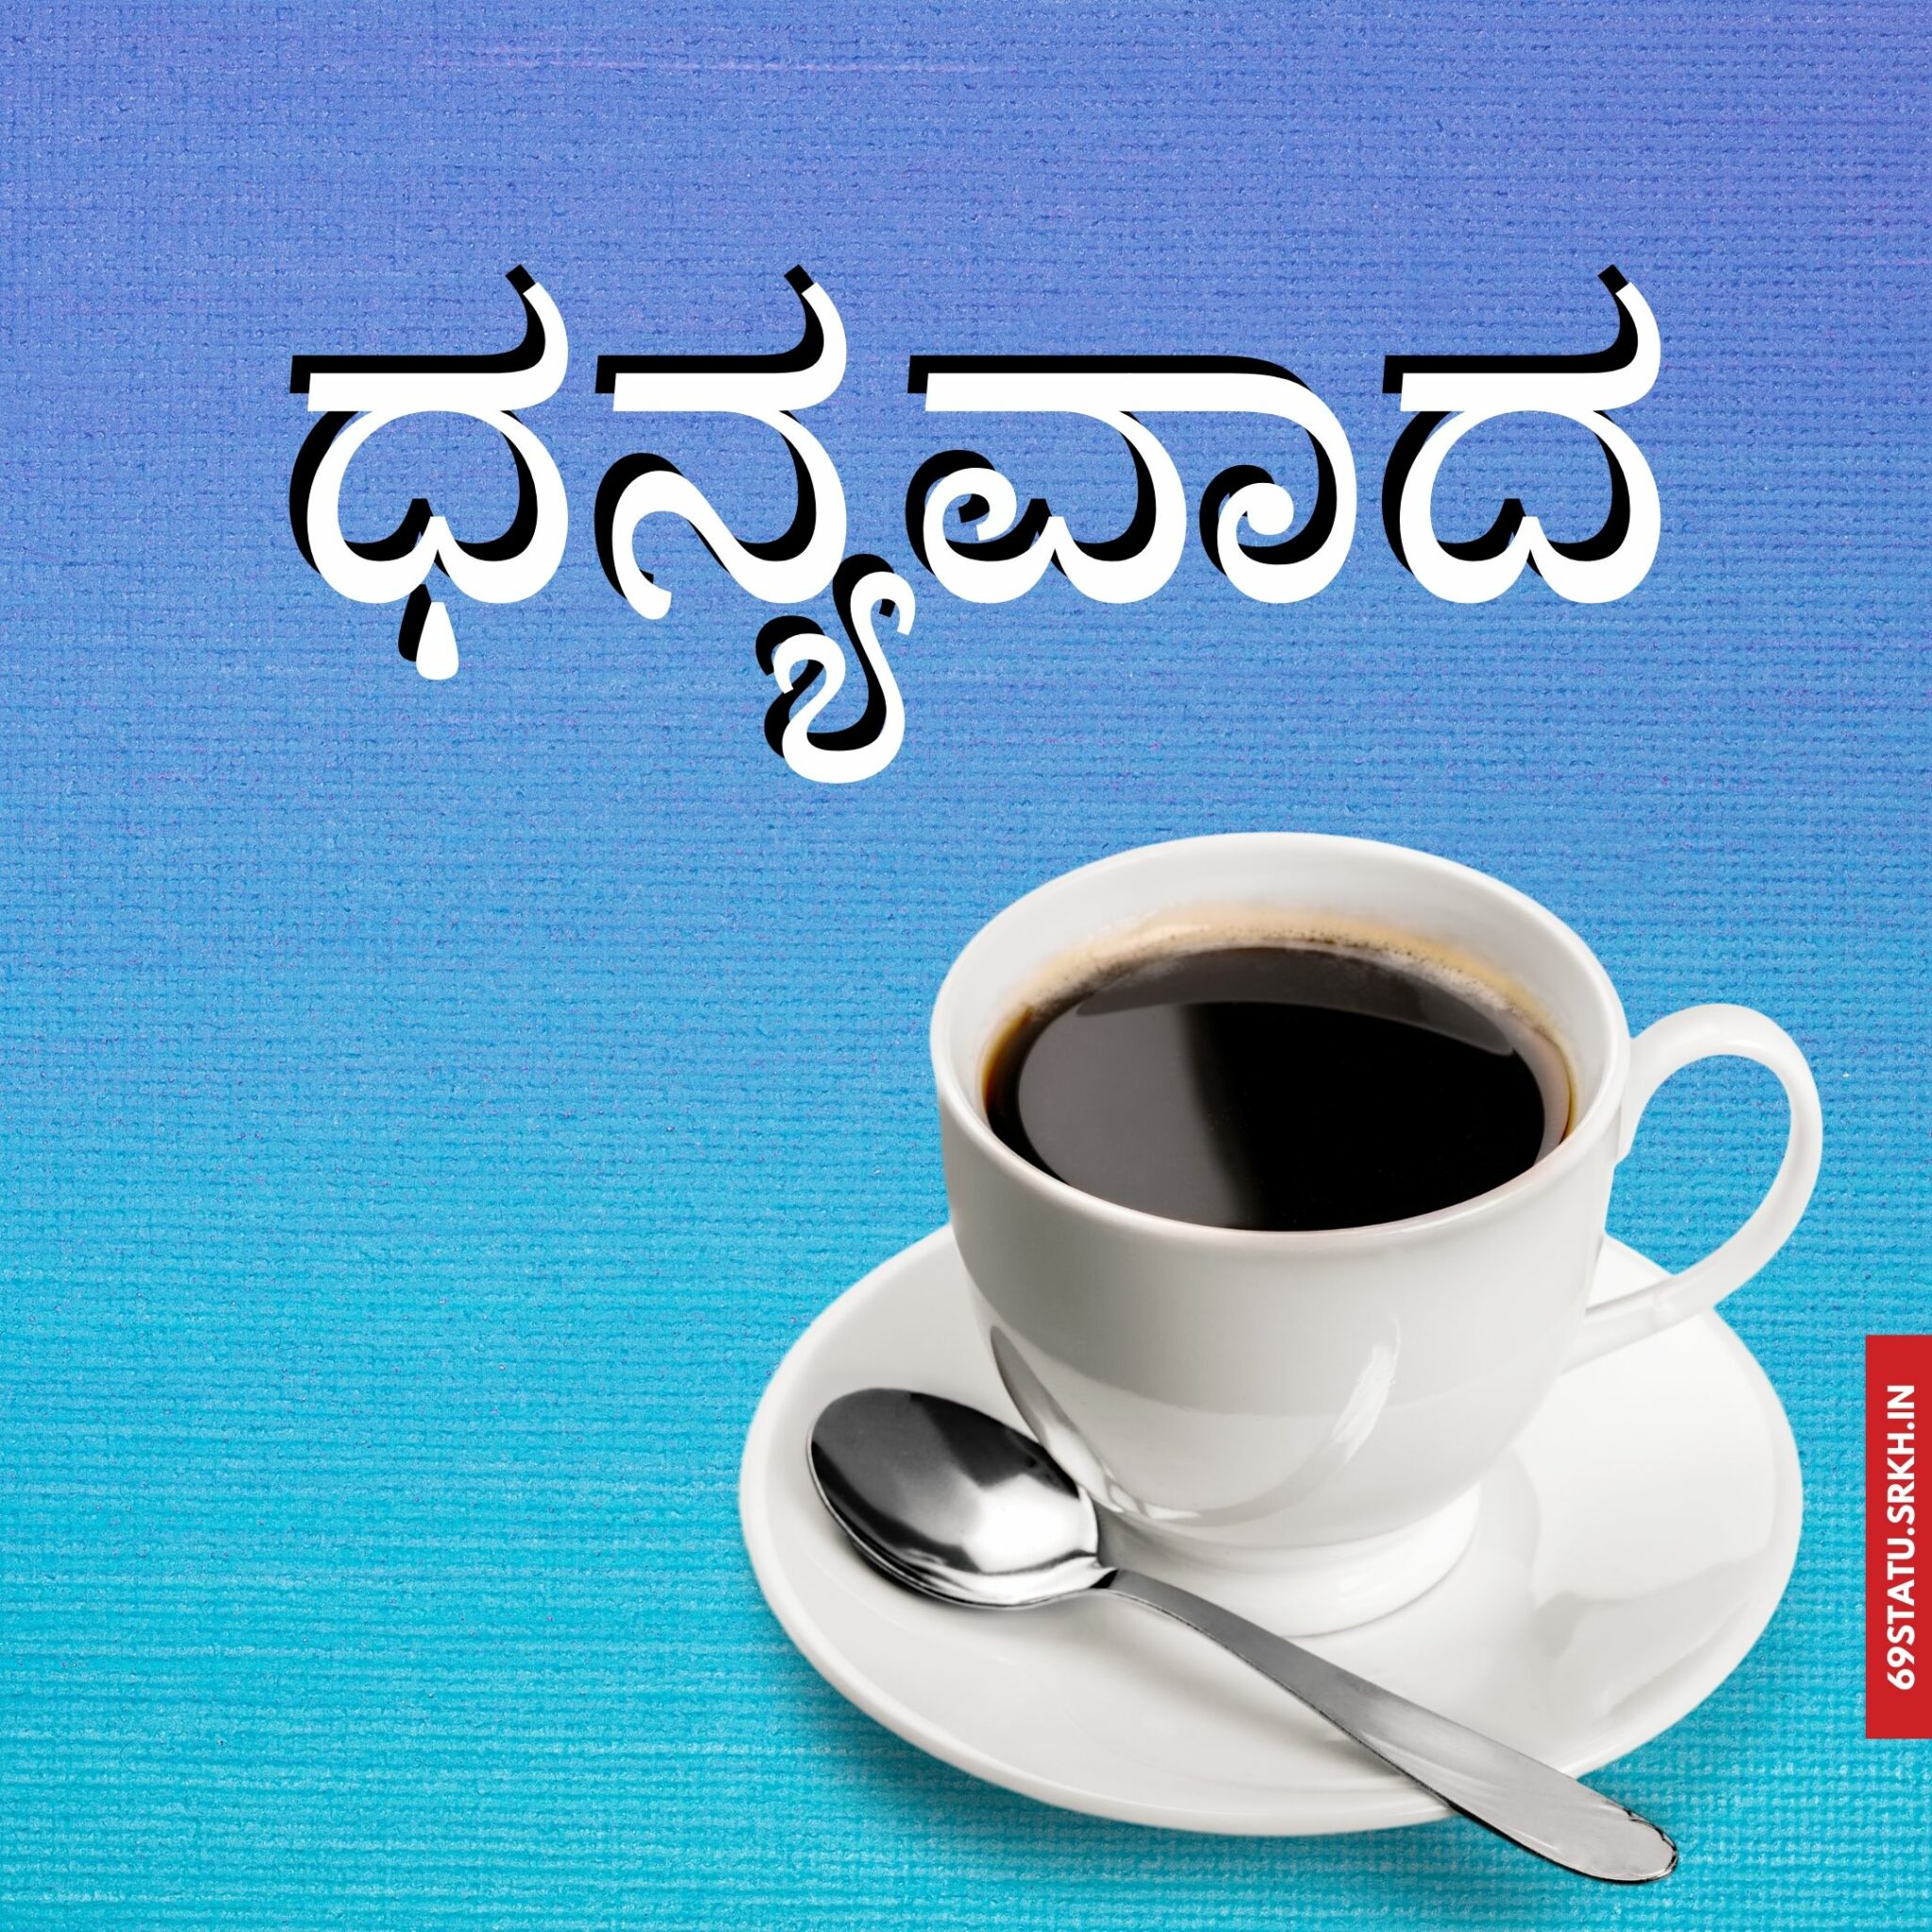 Thank You Images in Kannada